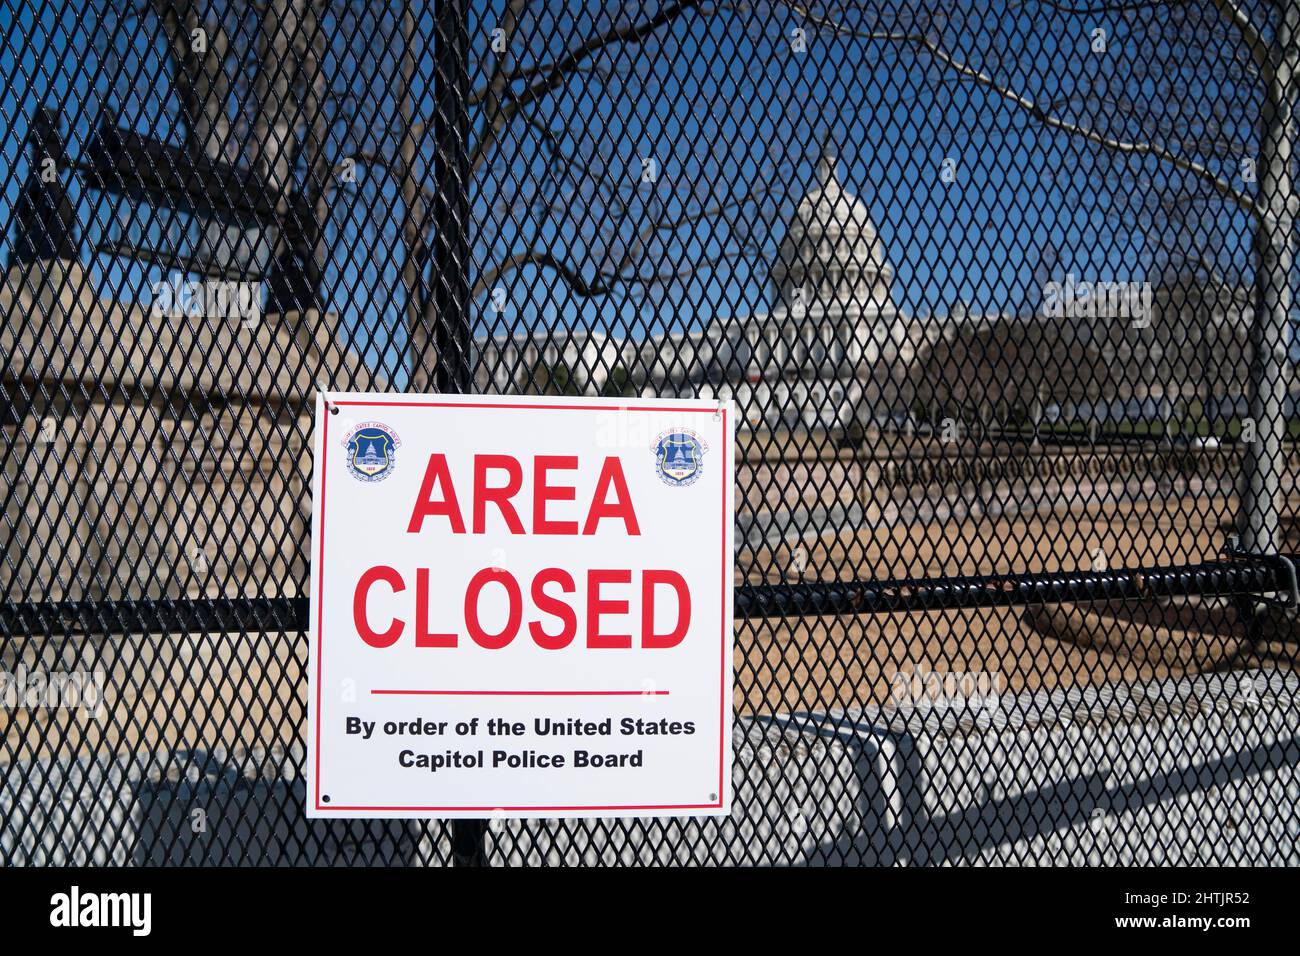 (220301) -- WASHINGTON, D.C., March 1, 2022 (Xinhua) -- Photo taken on Feb. 28, 2022 shows the U.S. Capitol building, seen through a barrier fence, in Washington, DC, the United States. Fencing has been reinstalled around the U.S. Capitol ahead of President Joe Biden's State of the Union address slated for Tuesday night. (Xinhua/Liu Jie) Credit: Liu Jie/Xinhua/Alamy Live News Stock Photo